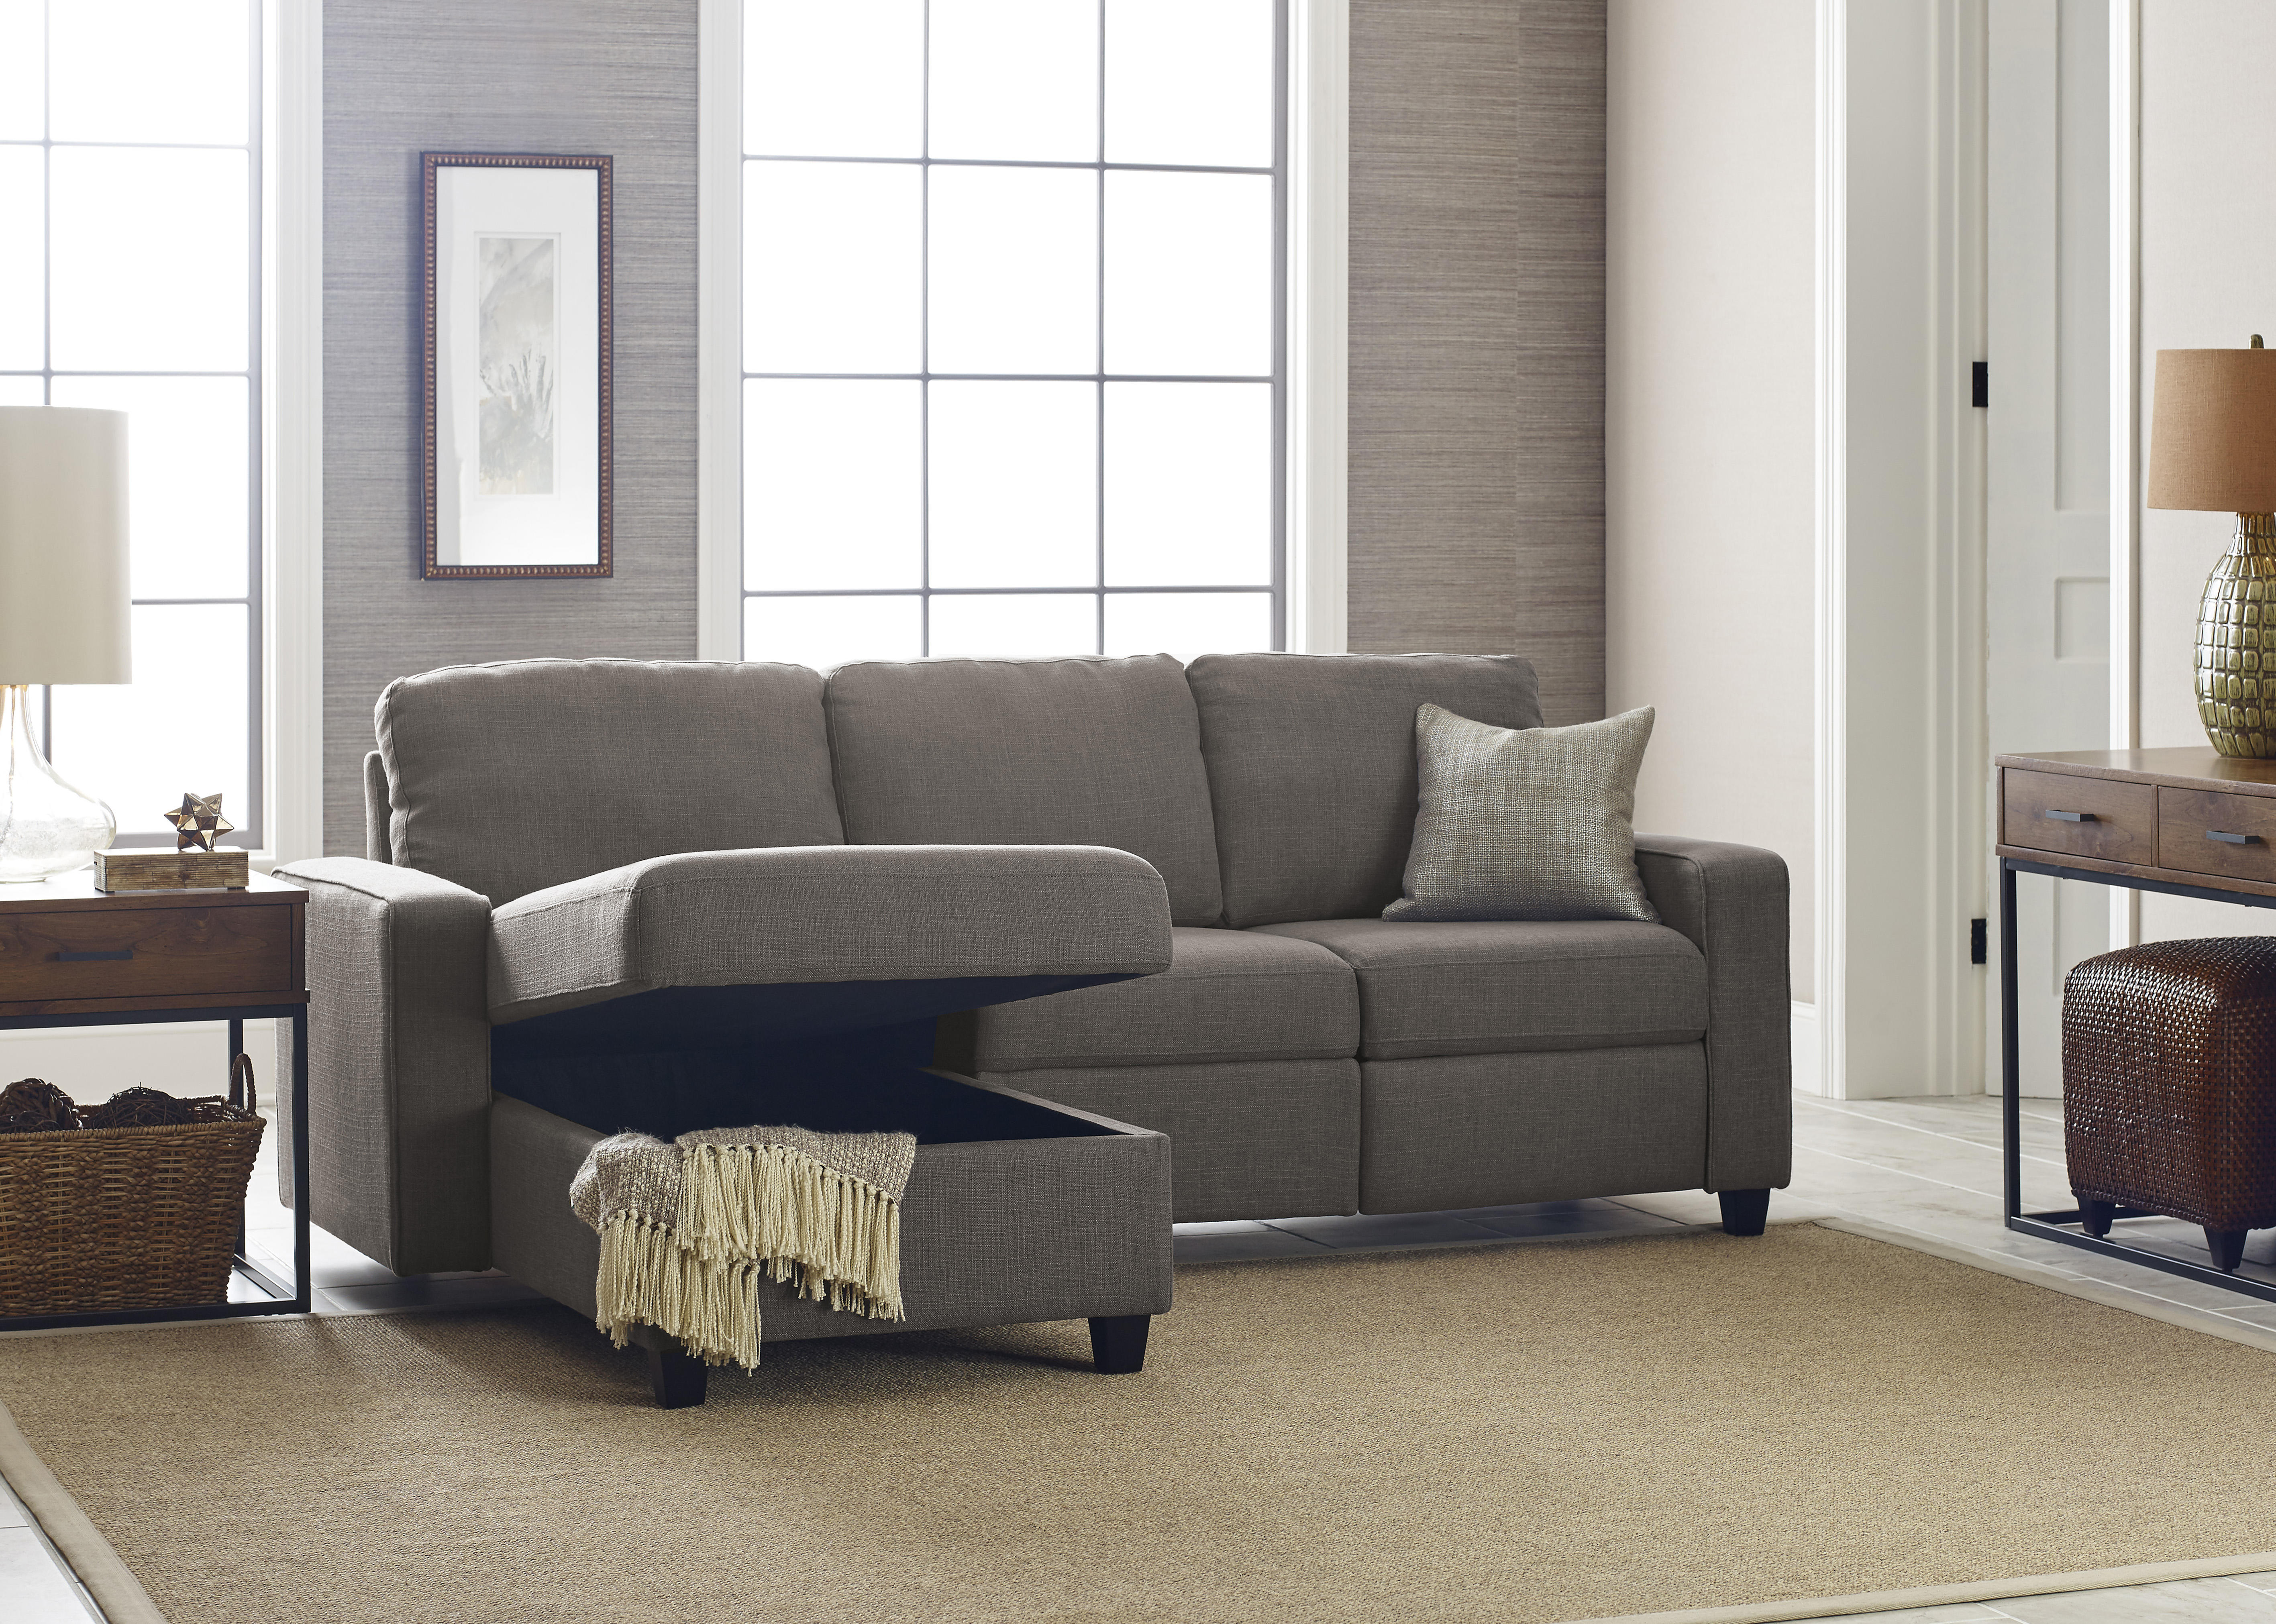 Serta Palisades Reclining Sectional with Left Storage Chaise - Gray - image 2 of 9